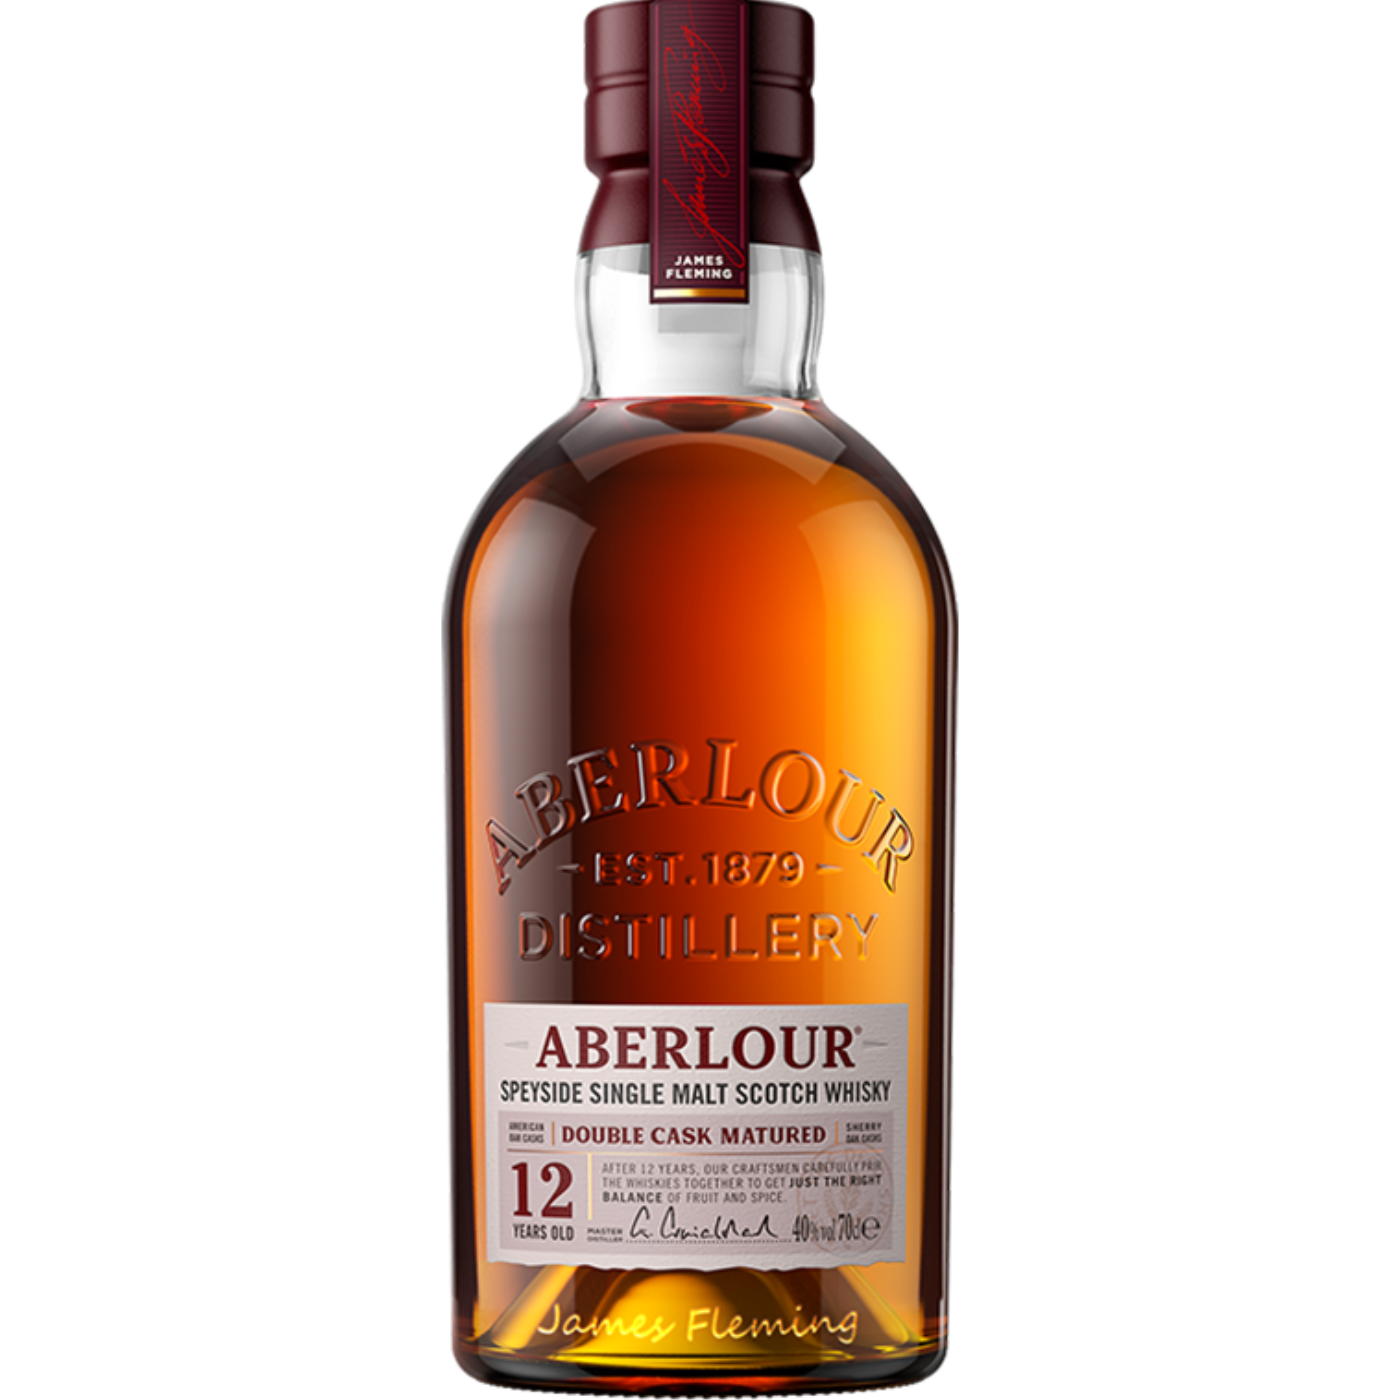 ABERLOUR 12 YEAR OLD DOUBLE CASK